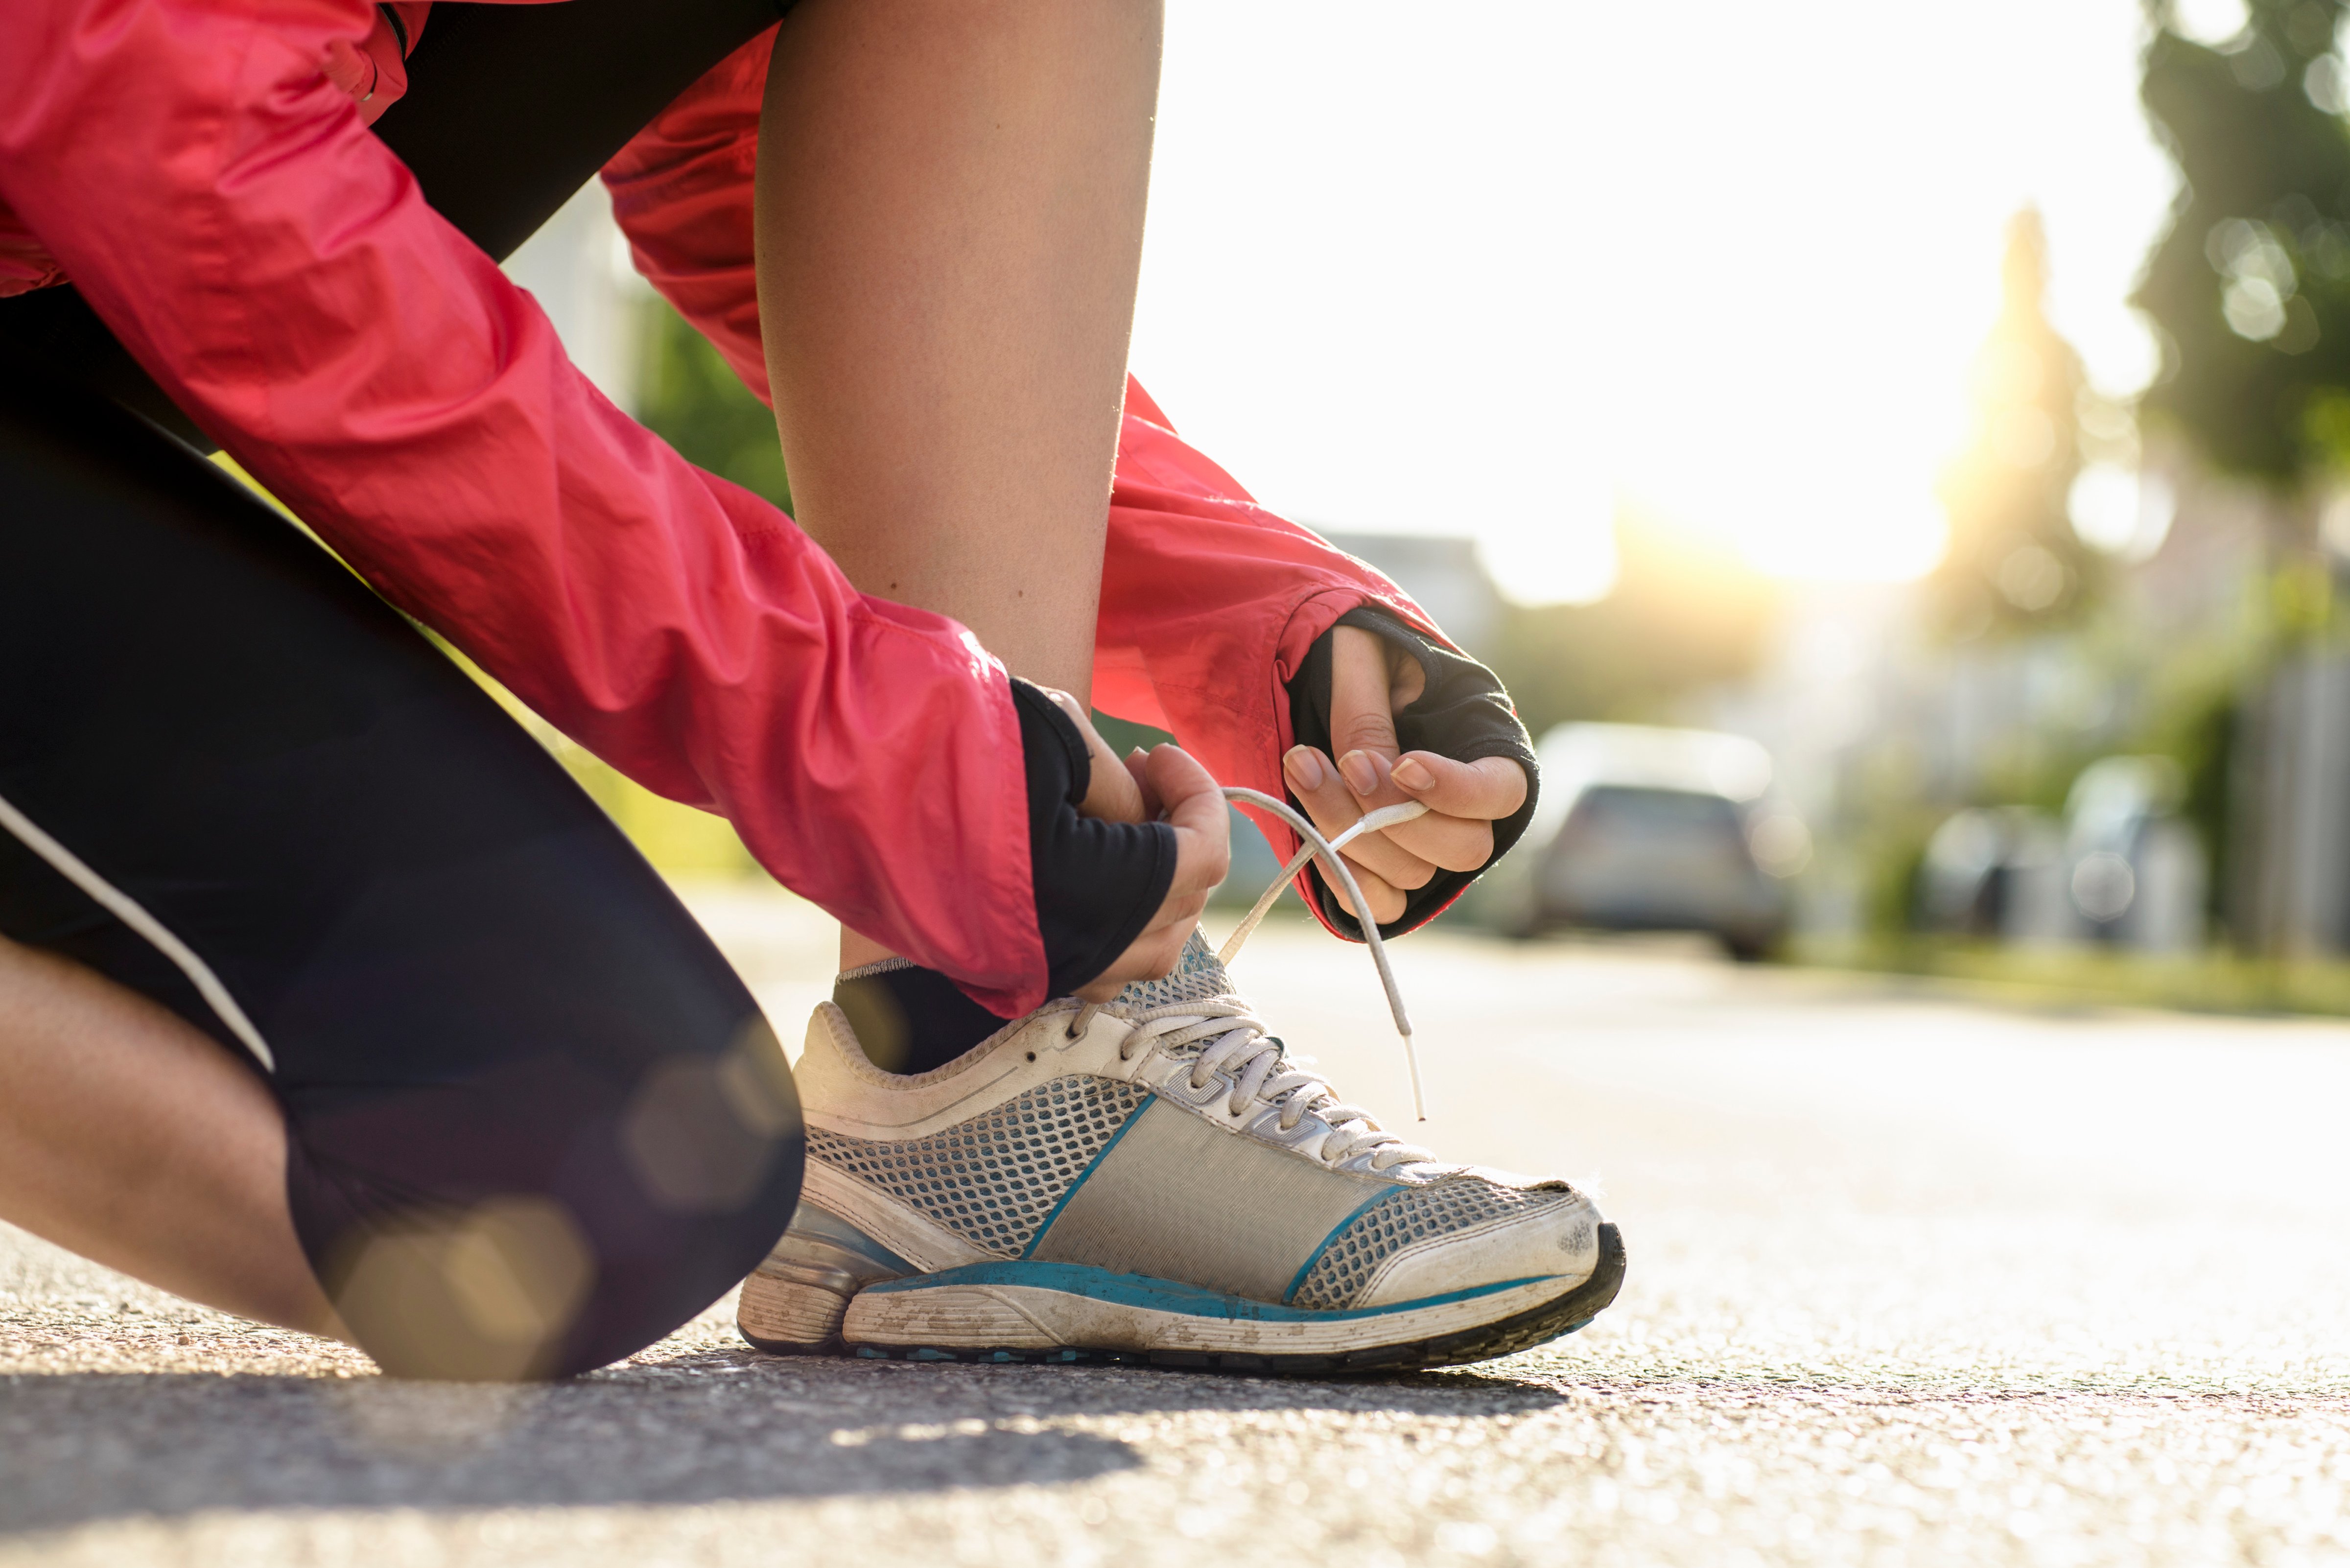 female runner tying shoe lace in a urban area